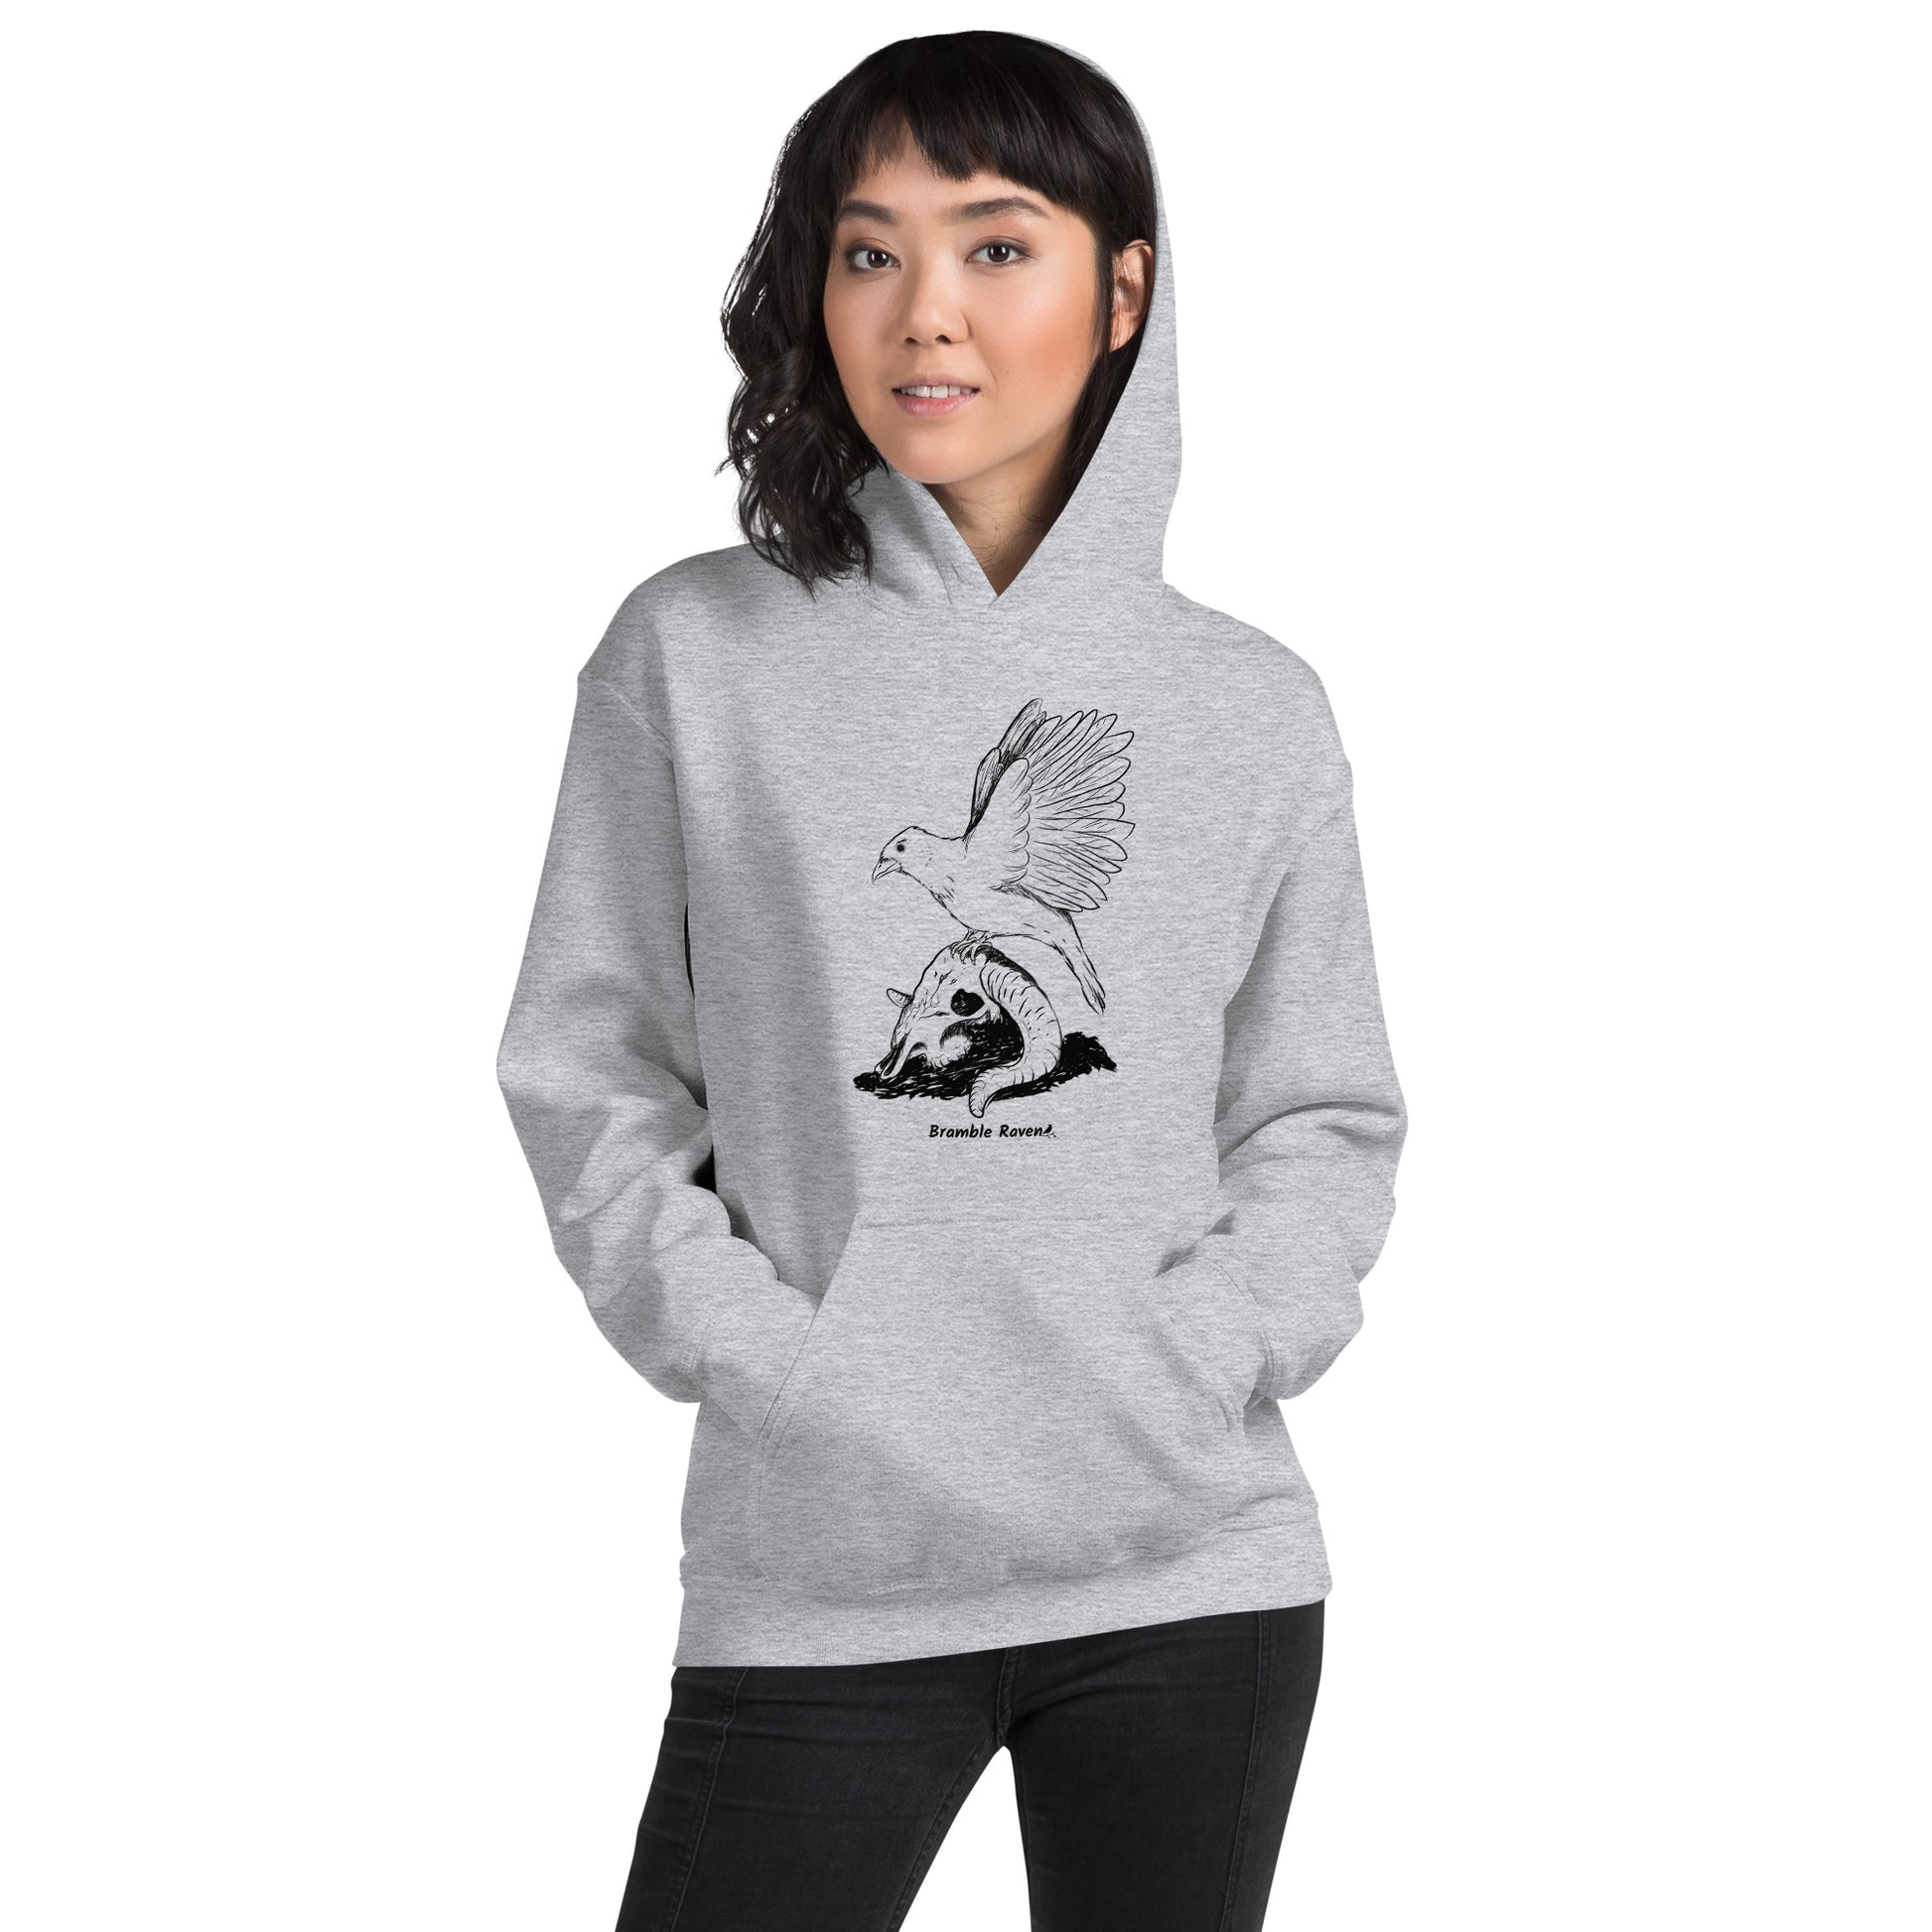 Sport grey colored unisex Reflections hoodie. Features image of a crow with wings outstretched sitting on a sheep skull.  Has a front pouch pocket and double lined hood. Shown on female model.